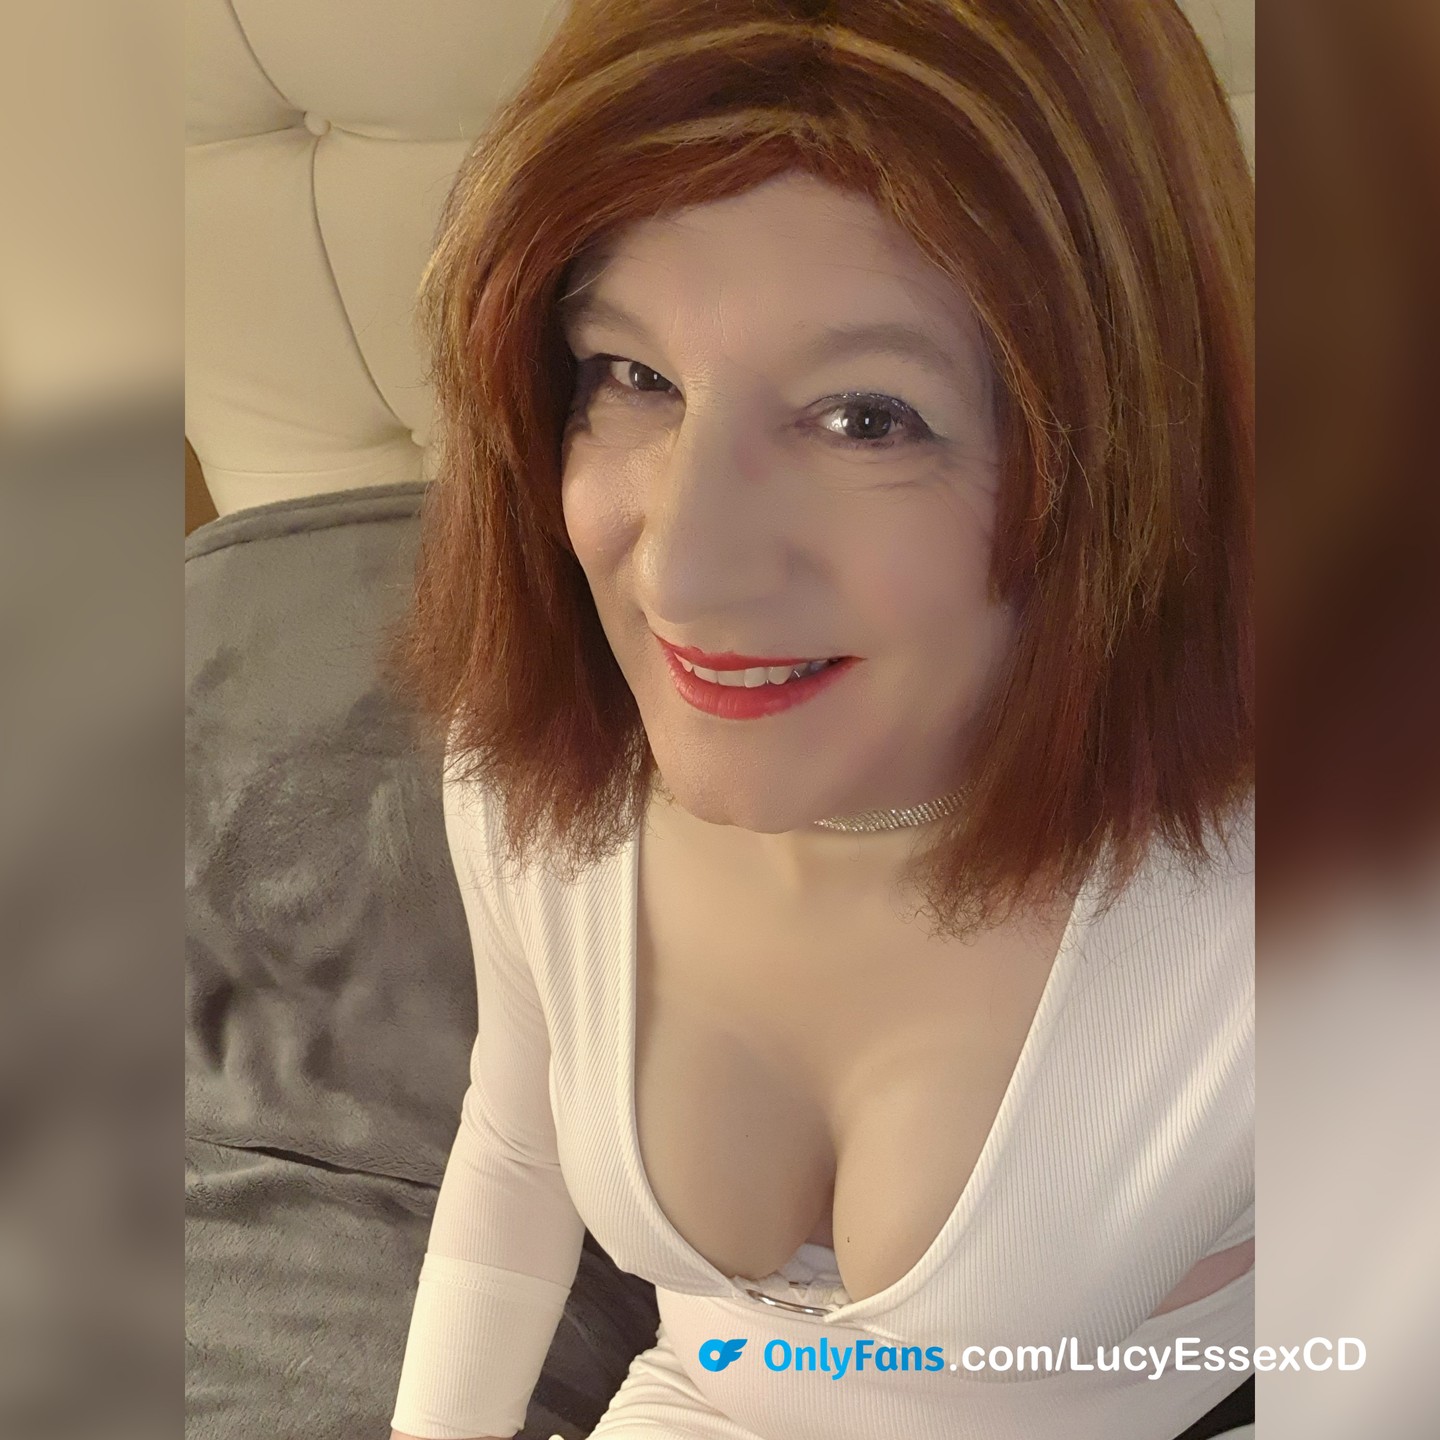 Check out my OnlyFans for more https://onlyfans.com/lucyessexcd

Subscribers get full access to thousands of my photos and videos with new and exclusive content being added all the time.

#tgirl #tgirleyecandy #tgirlsdoitbetter #tgirlselfie #tgirlselfies #tgirlsofinstagram #tgirlgoddesses #tgirlsarebeautiful #tgirldoitbetter #sexytgirl #crossdressing #crossdresseruk #crossdressers #crossdressed #lgbt #lgbtpride #lgbtq #trans #transisbeautiful #transpride #redhead #selfie